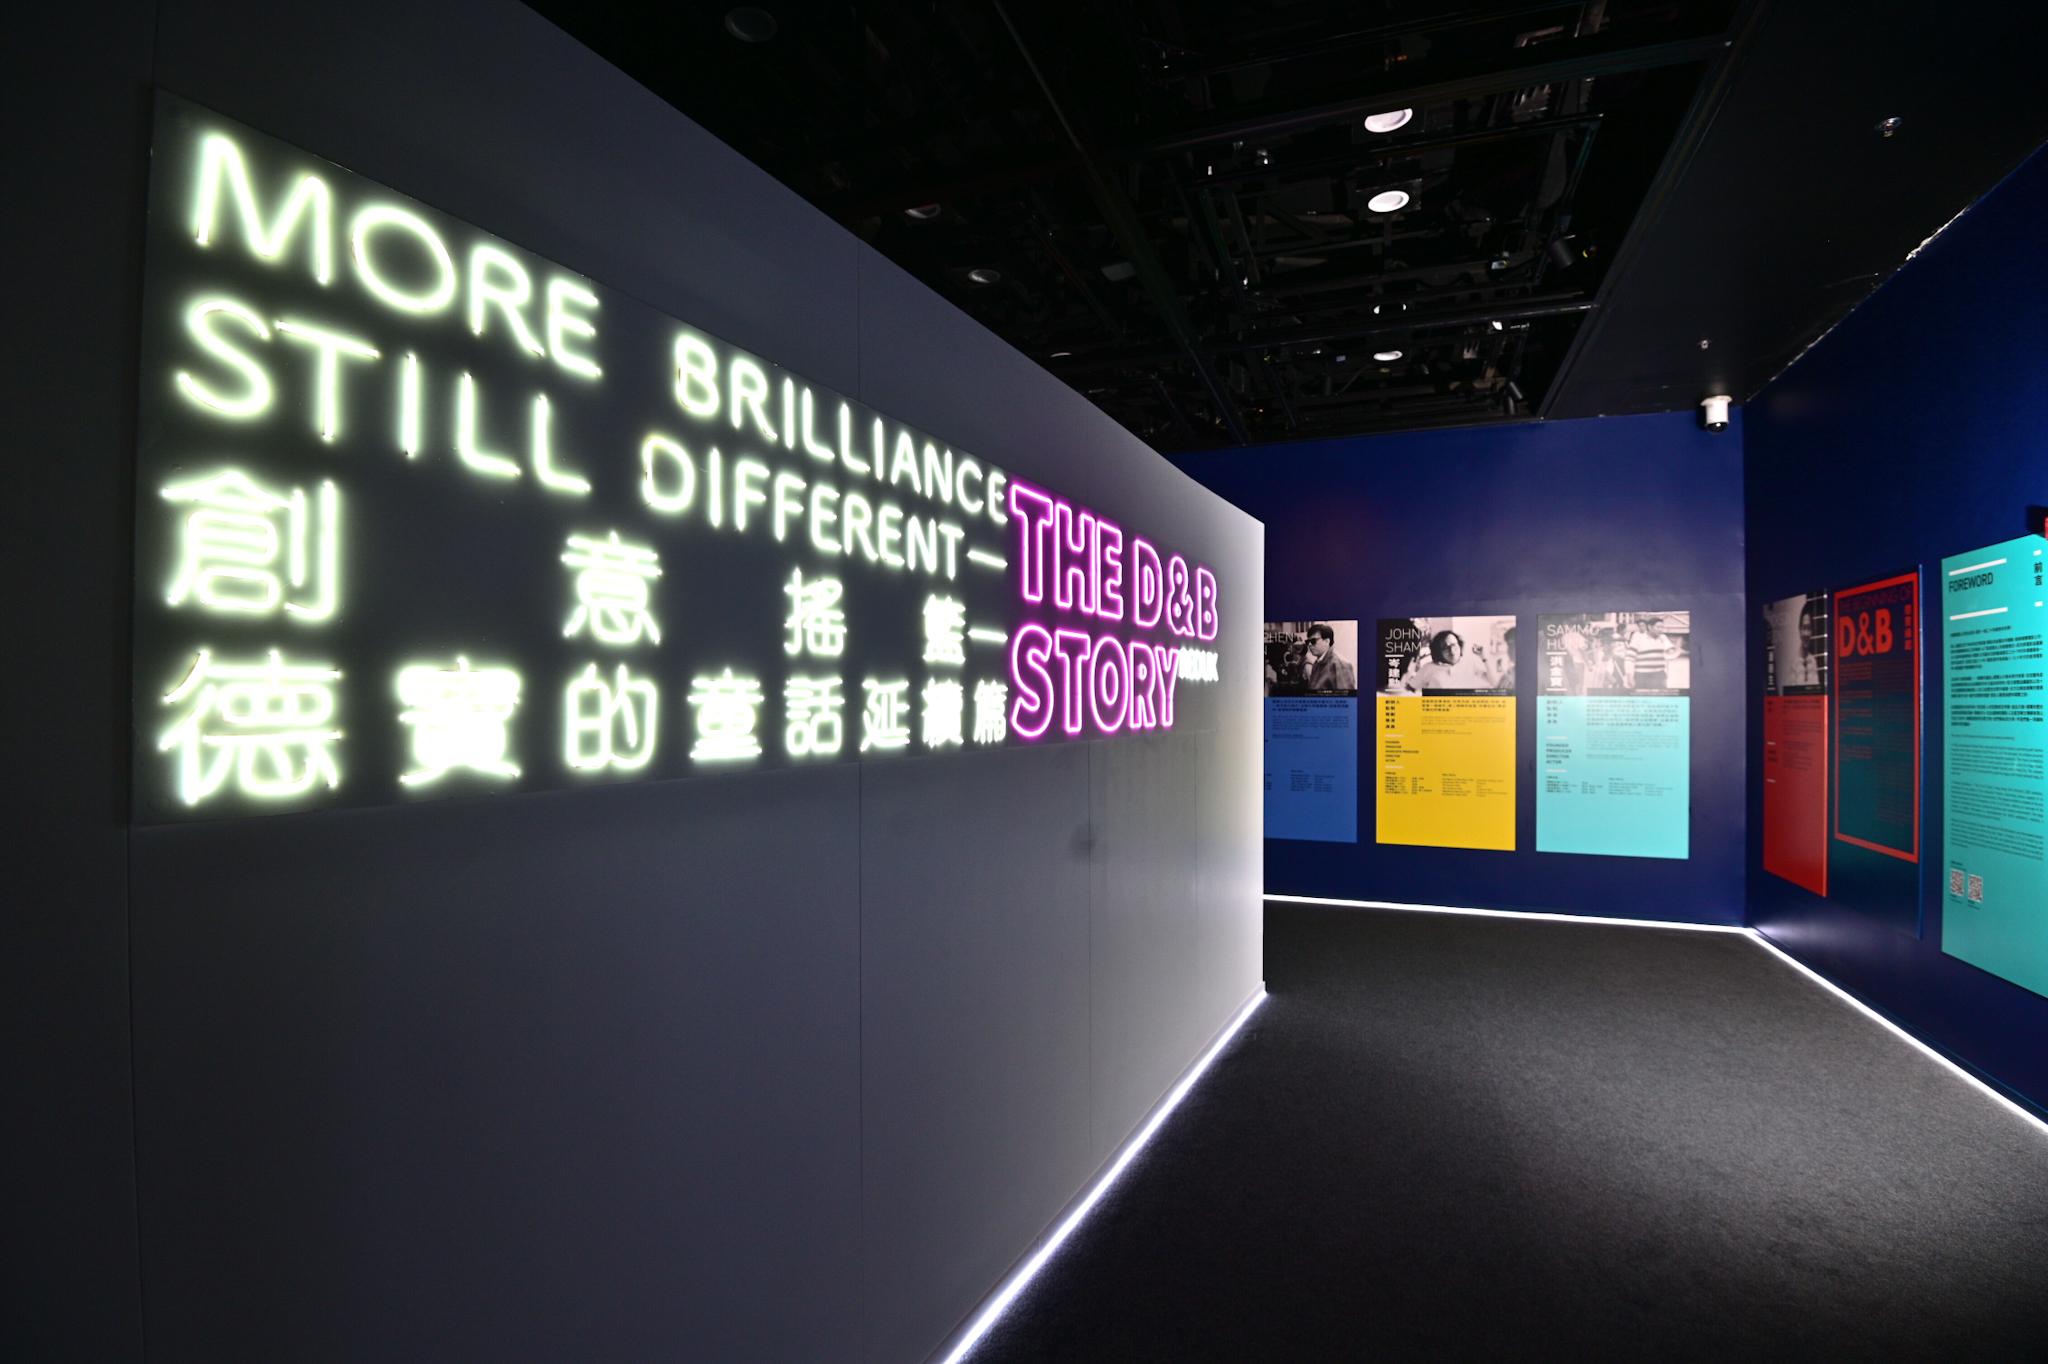 The Hong Kong Film Archive (HKFA) of the Leisure and Cultural Services Department launched the "More Brilliance, Still Different - The D & B Story Redux" exhibition from today (July 29) to February 12 next year at the Exhibition Hall of the HKFA, exploring the capable production team of the D & B Films Company and their contributions.